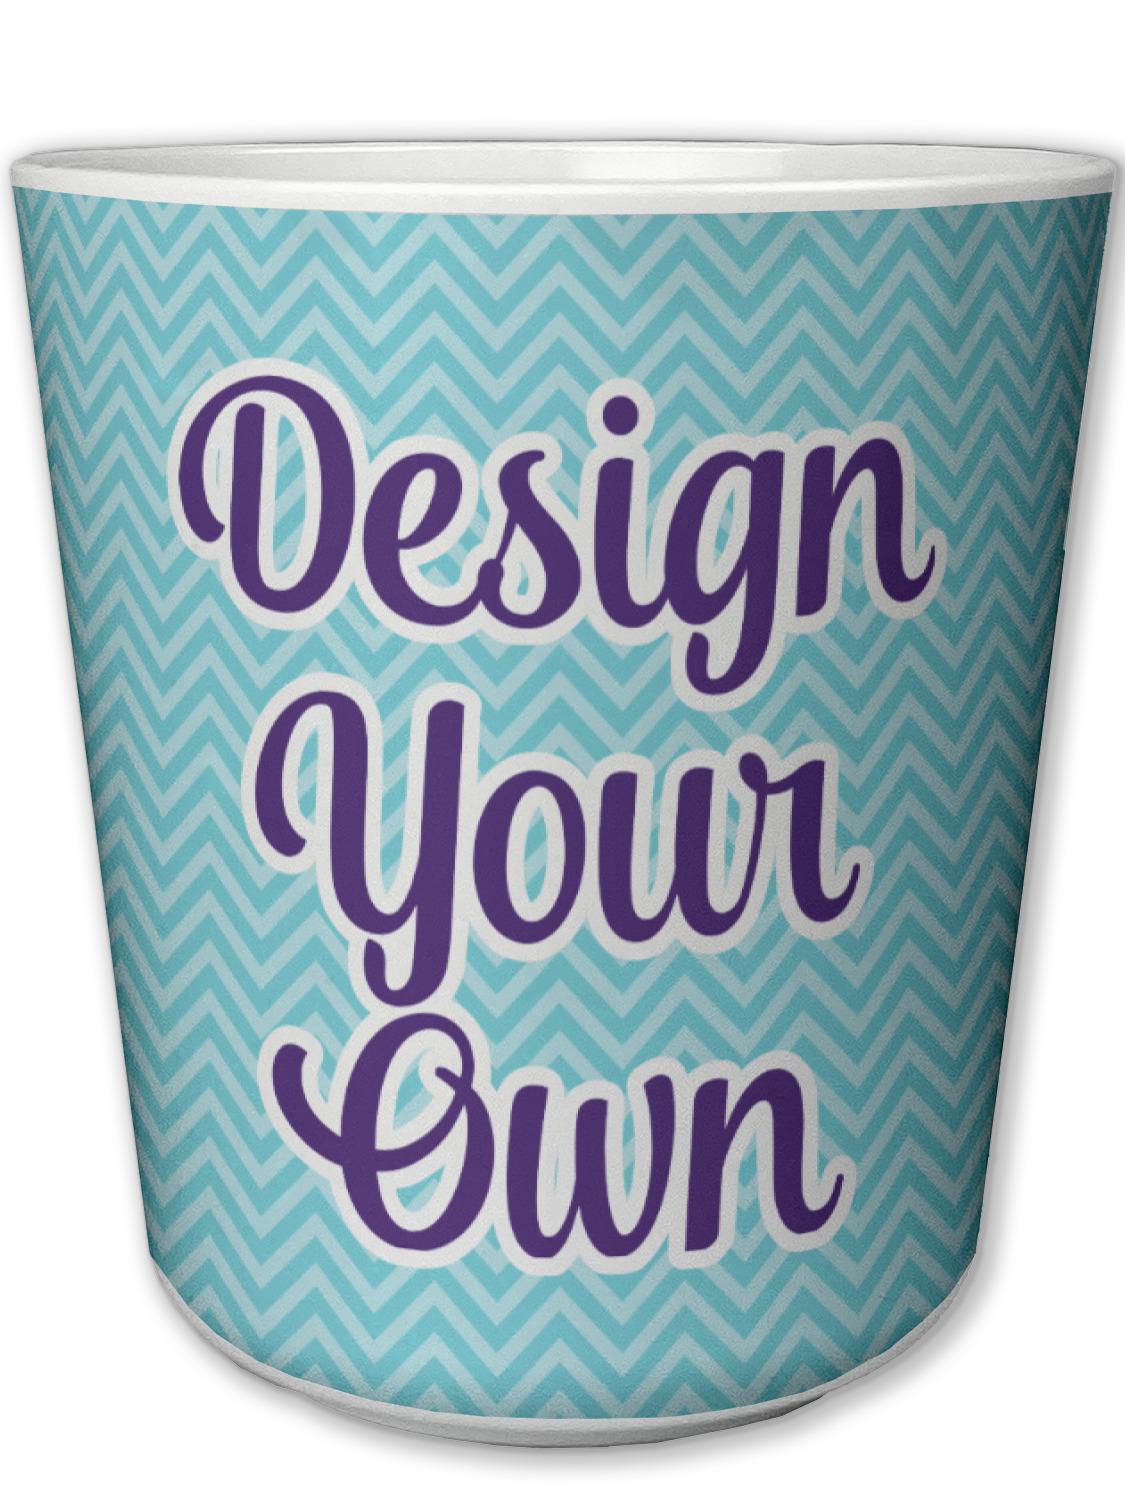 https://www.youcustomizeit.com/common/MAKE/965833/Design-Your-Own-Kids-Cup-Front.jpg?lm=1611957464